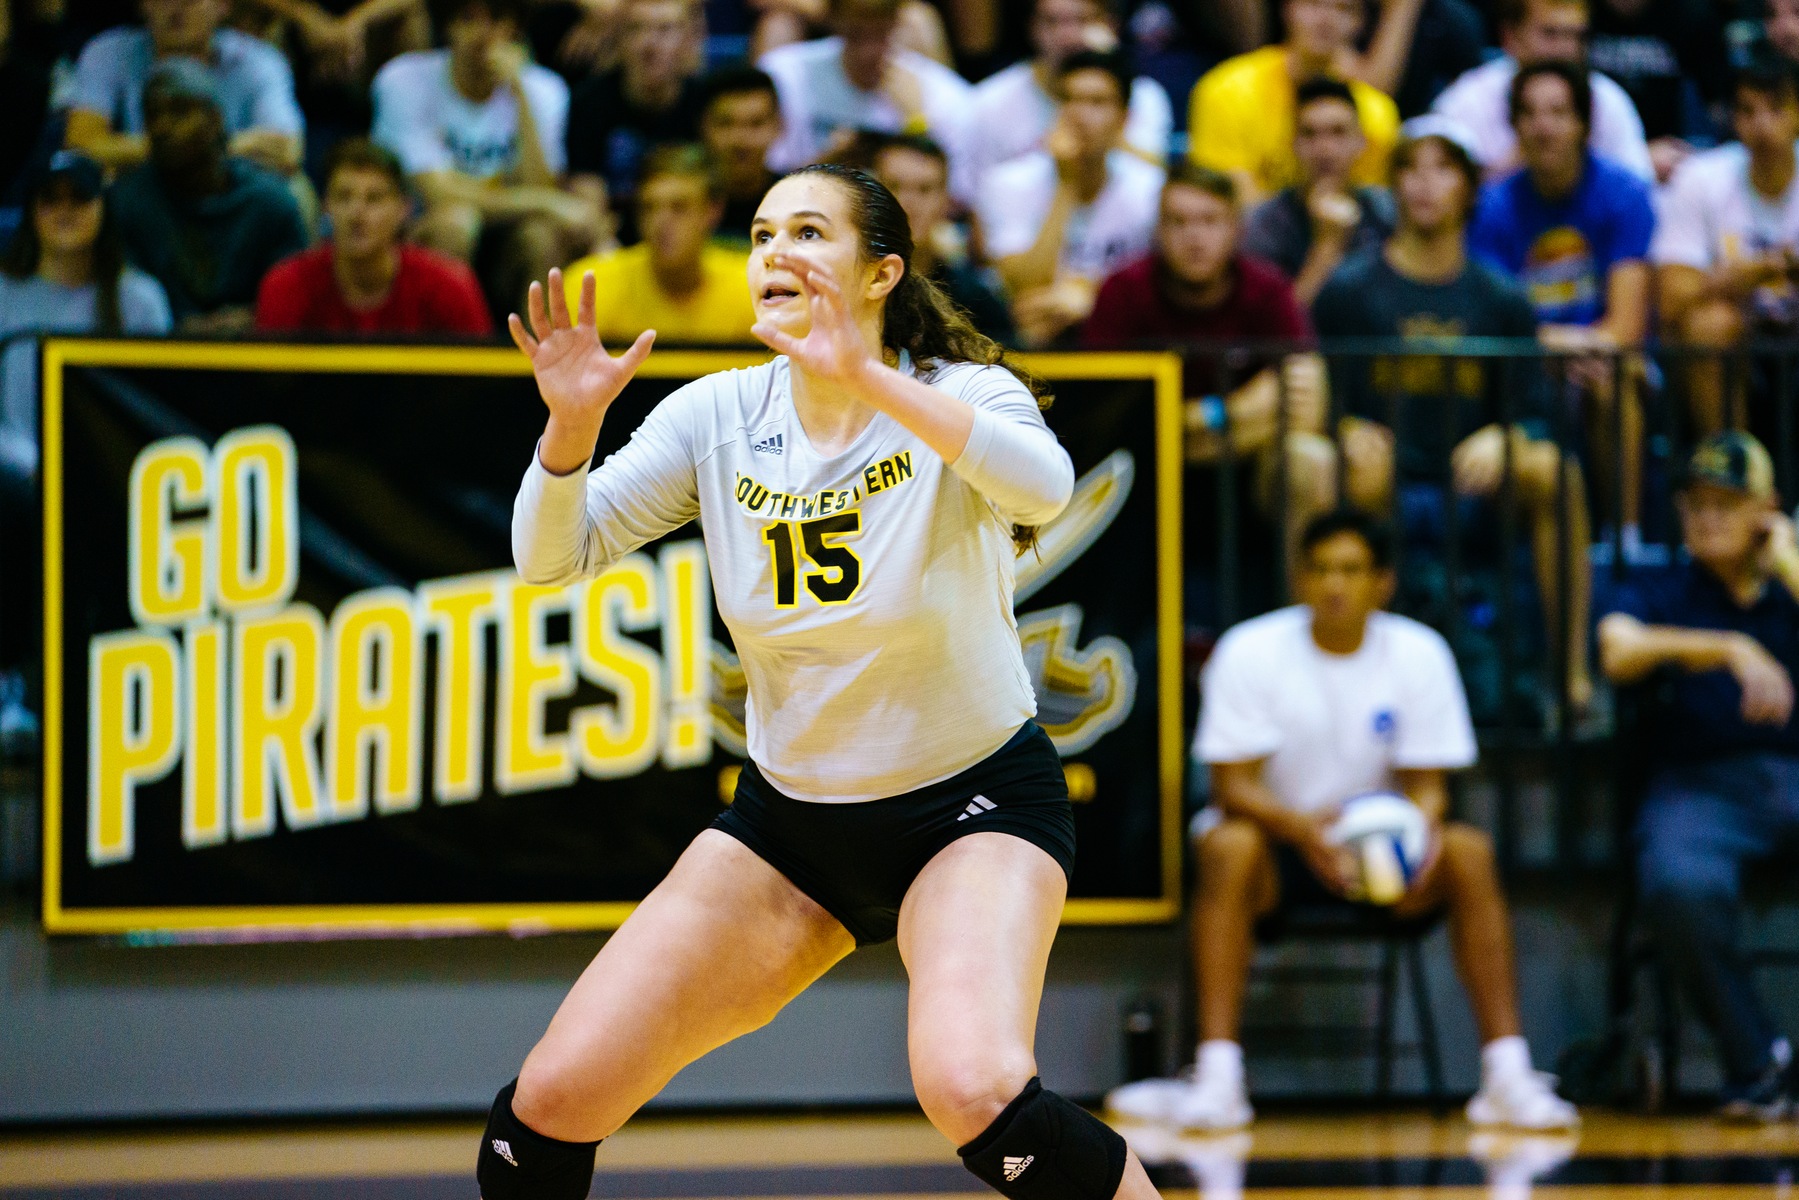 Volleyball Wraps Up Regular Season Conference Play With Loss to Trinity